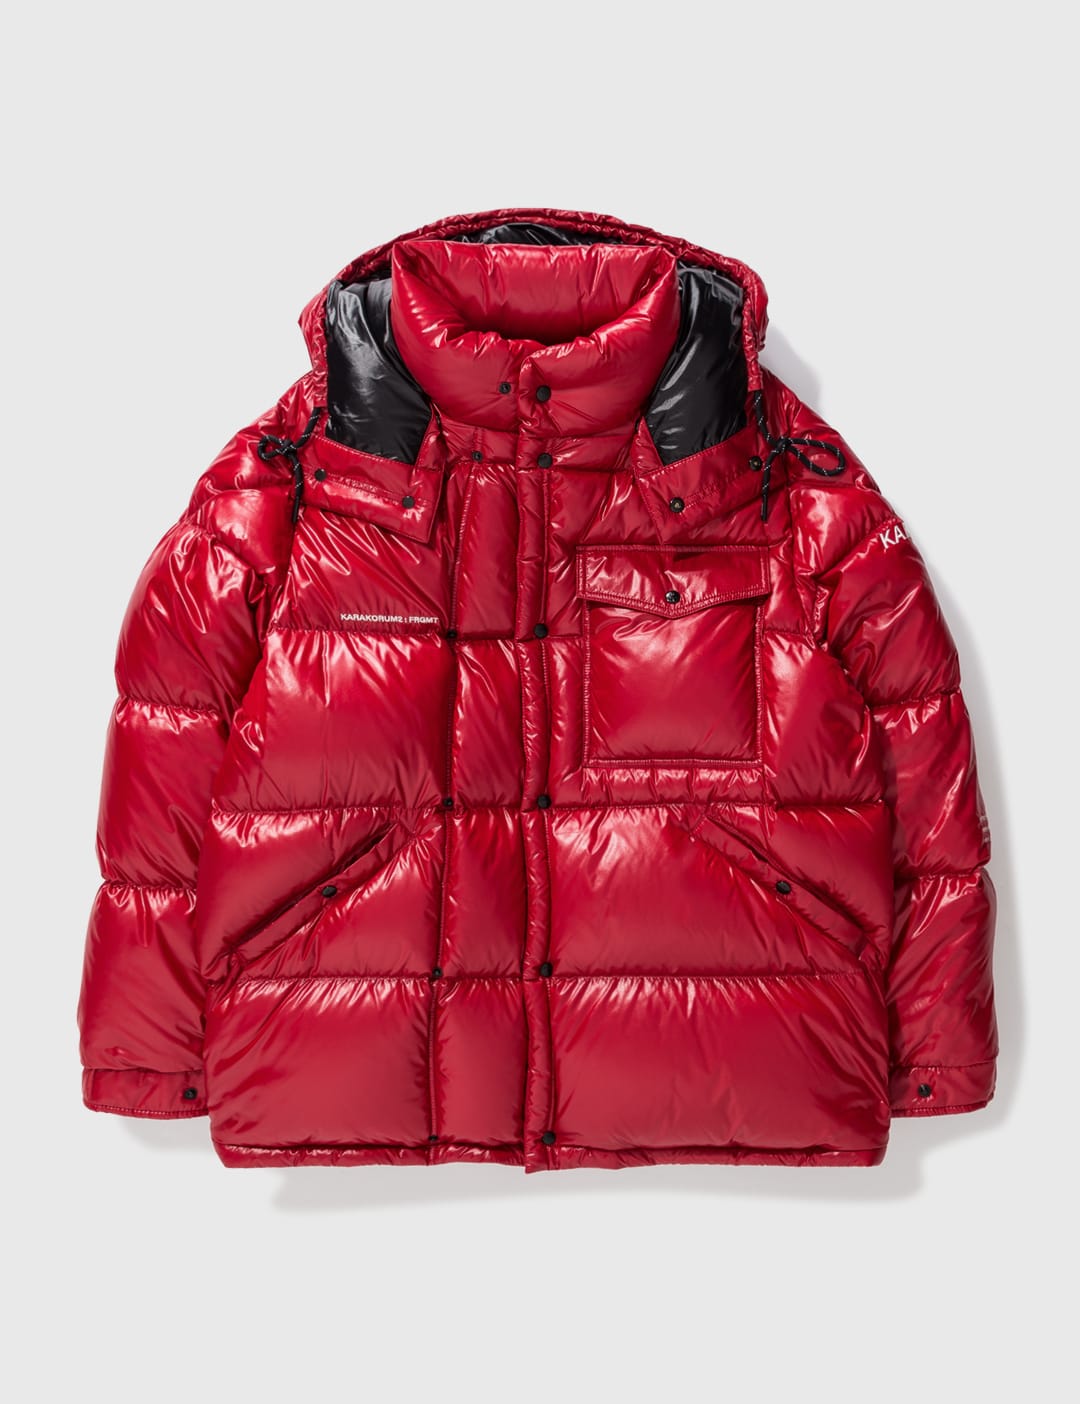 Moncler - Maury Jacket | HBX - Globally Curated Fashion and 